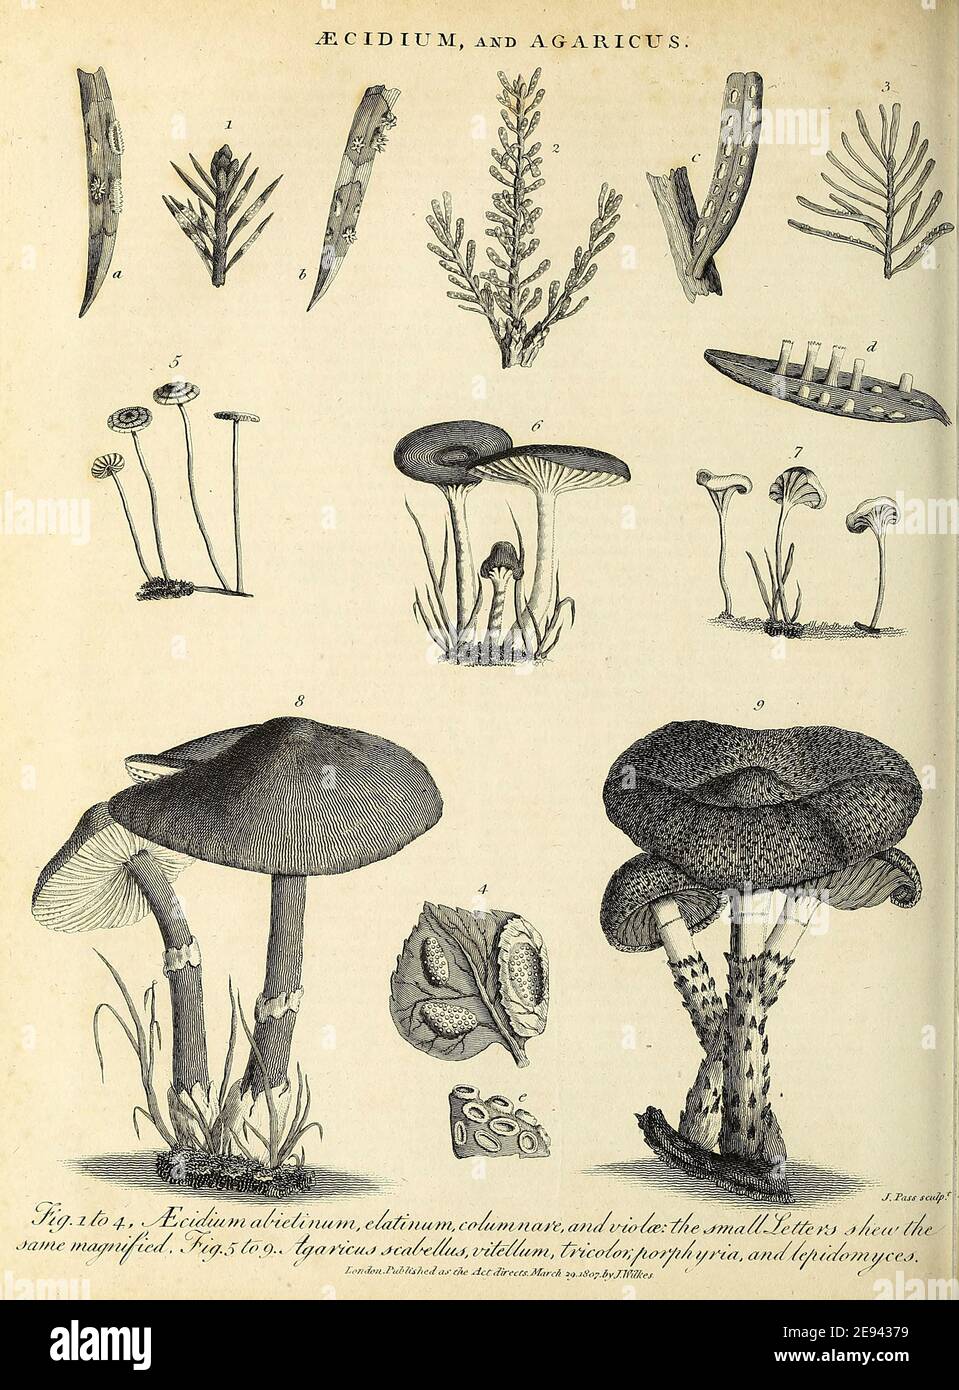 Various examples of Aecidium [rust fungi] and Agaricus [edible and poisonous mushrooms] Copperplate engraving From the Encyclopaedia Londinensis or, Universal dictionary of arts, sciences, and literature; Volume I;  Edited by Wilkes, John. Published in London in 1810 Stock Photo